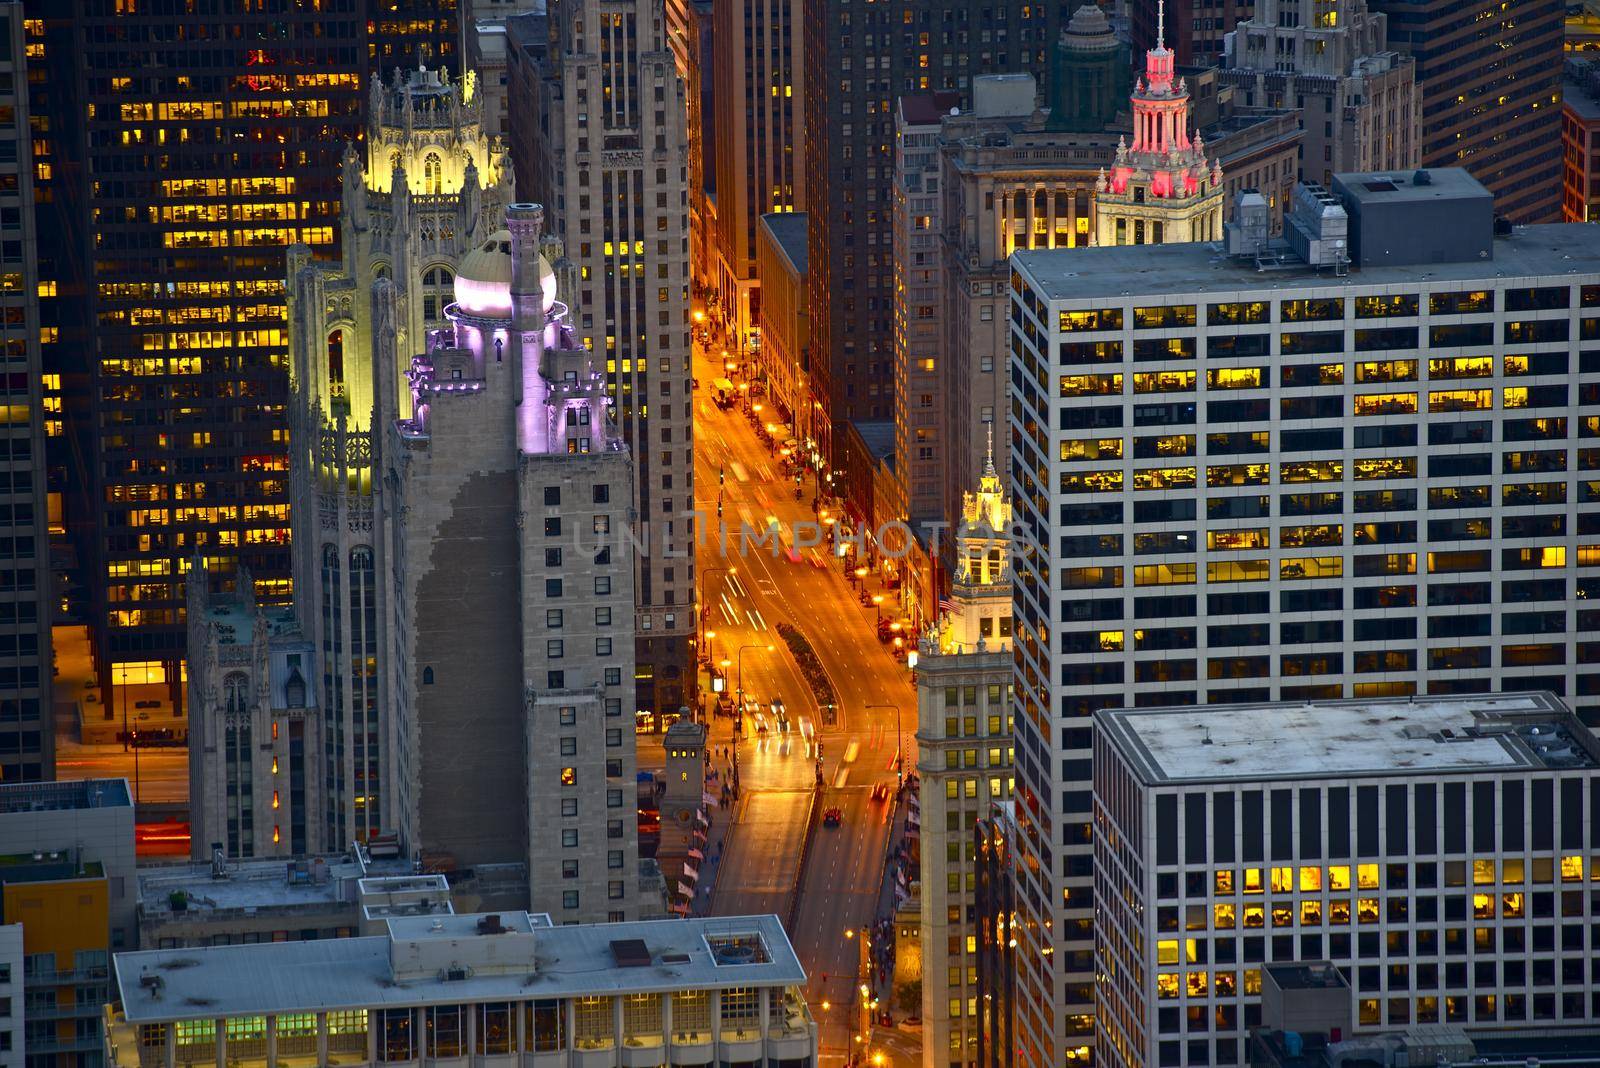 Streets of Chicago at Night - Bird Eye View. Michigan Avenue. Chicago, USA